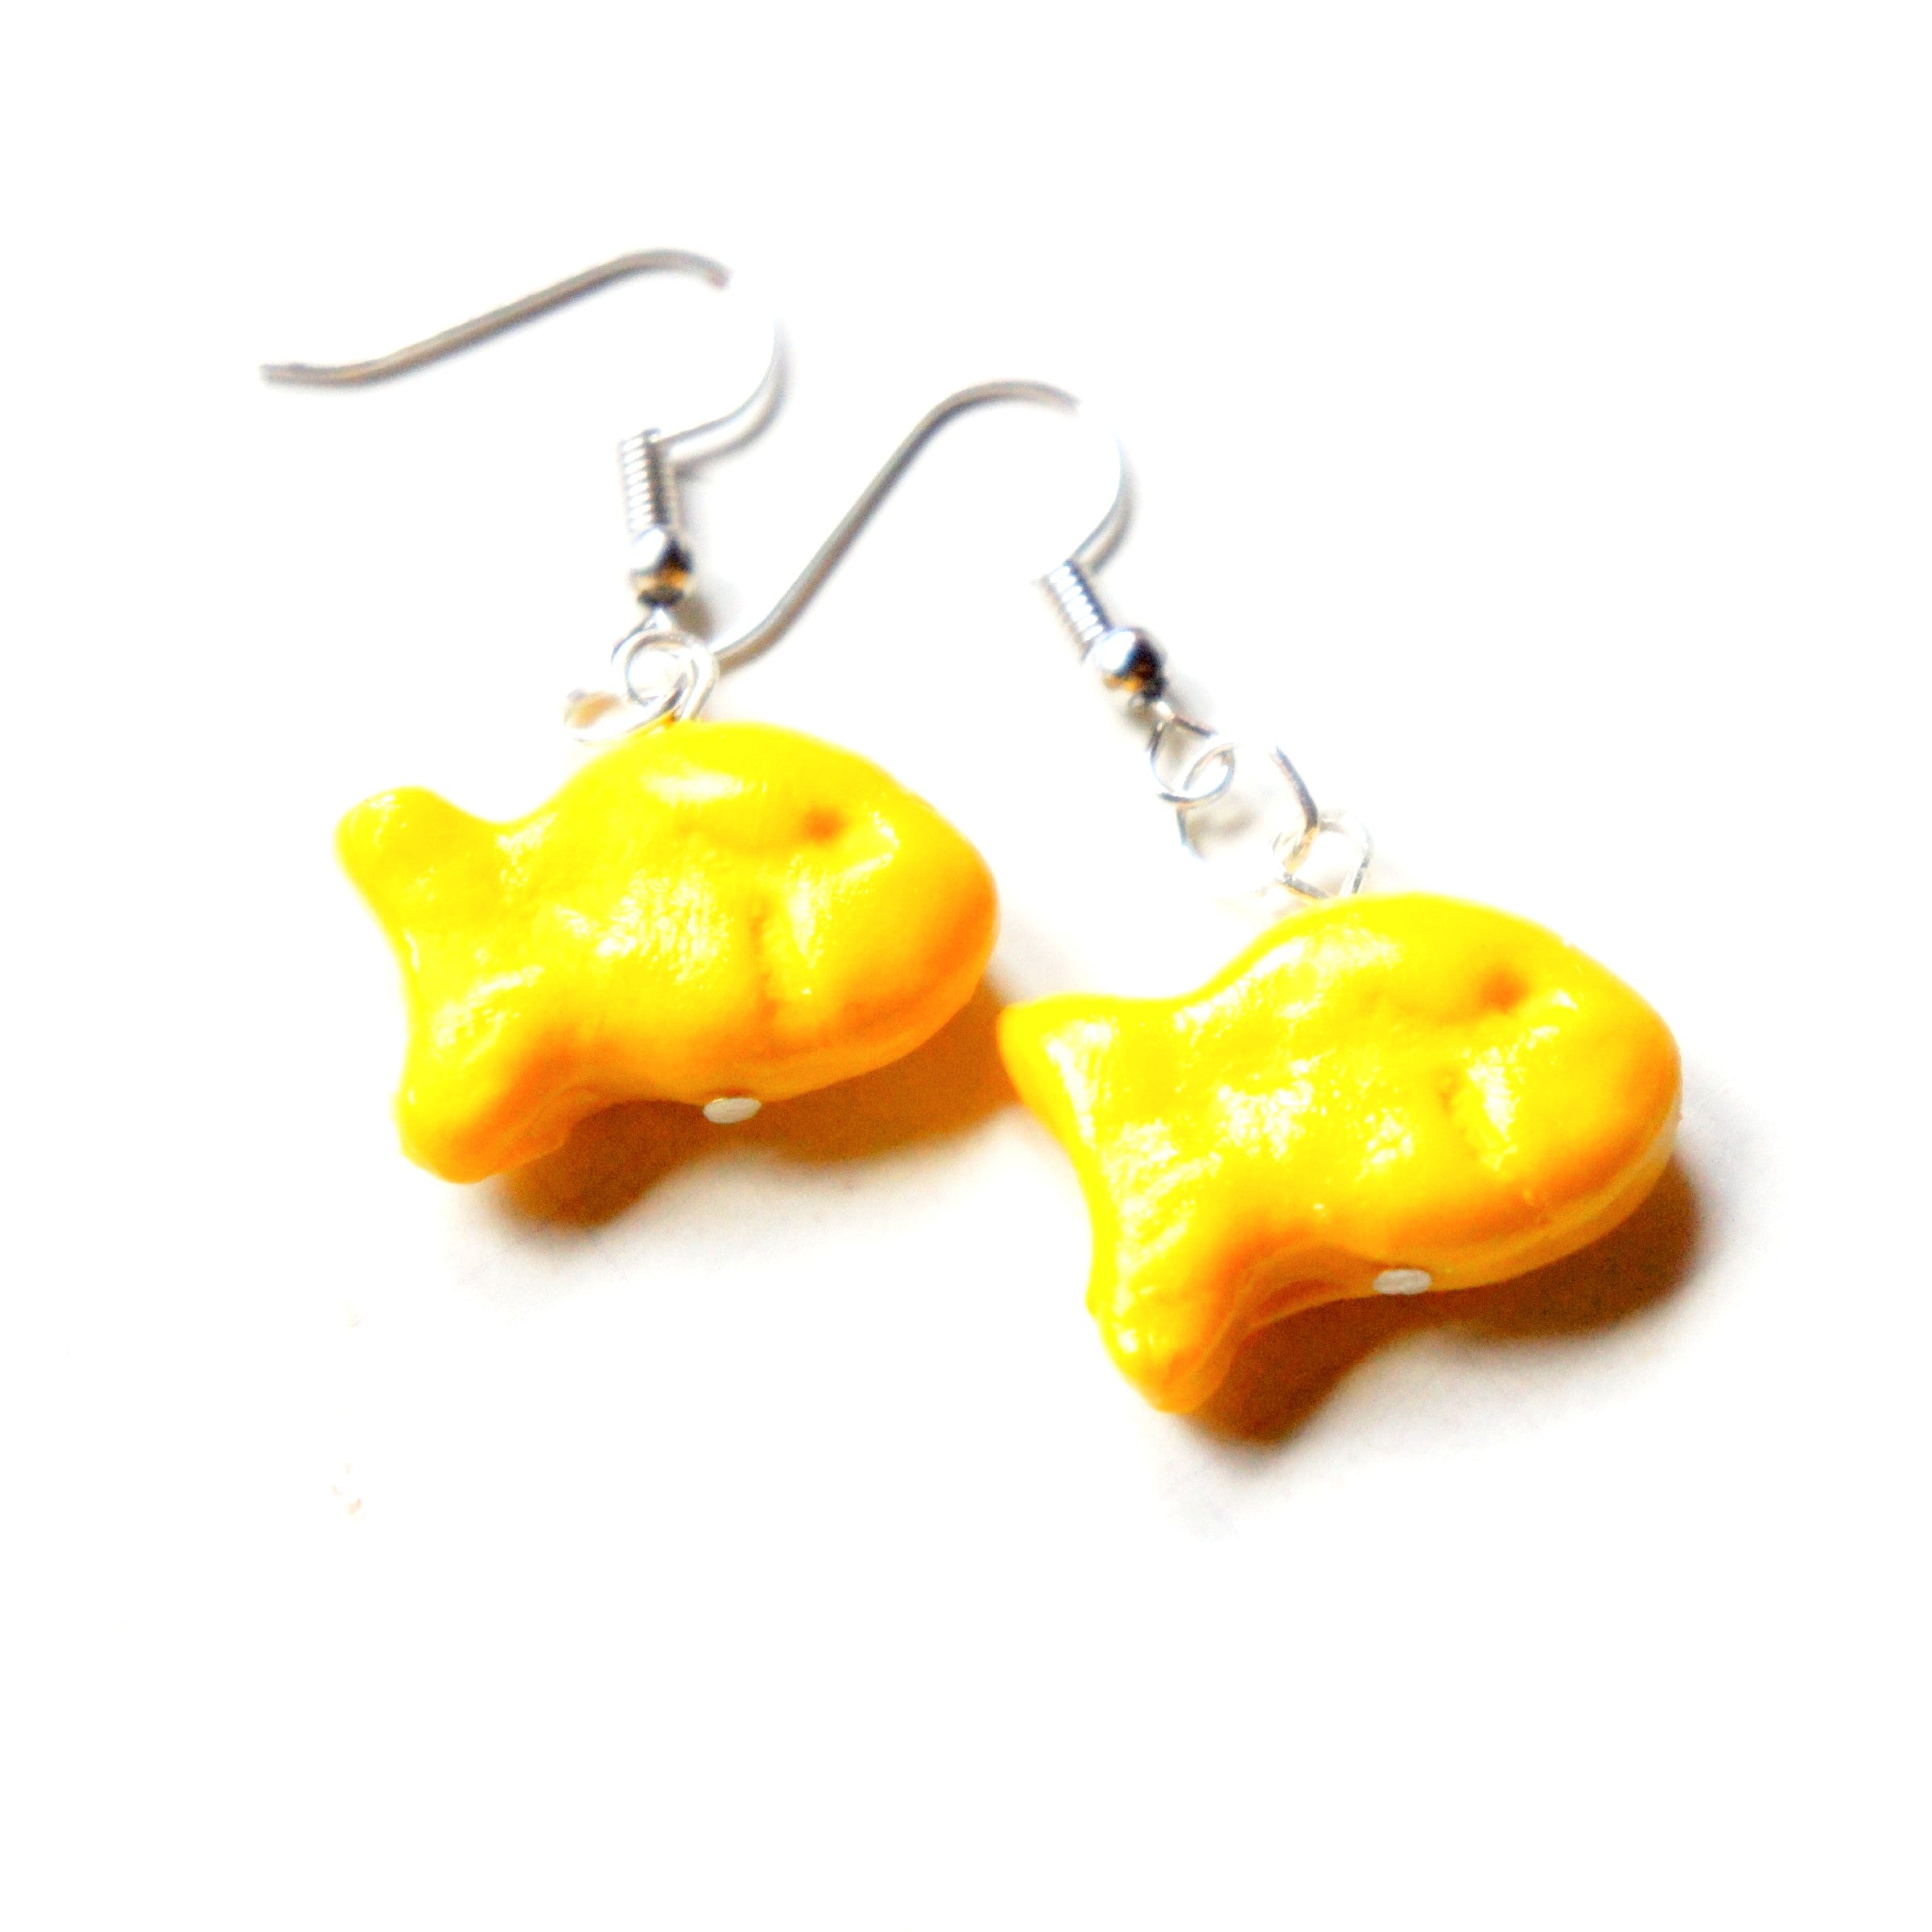 Goldfish Crackers Earrings - Jillicious charms and accessories